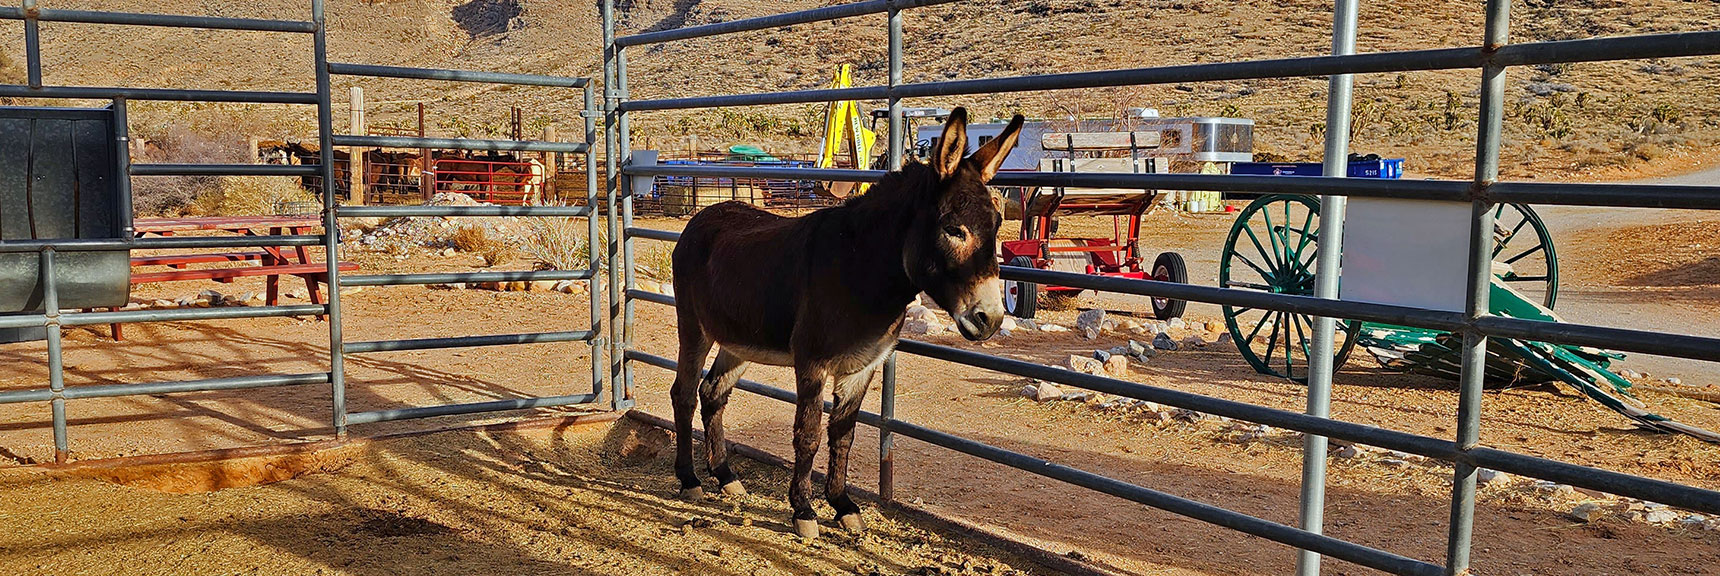 Every Horse Corral Needs a Burro | Western Outer Circuit | Blue Diamond Hill | Red Rock Canyon, Nevada